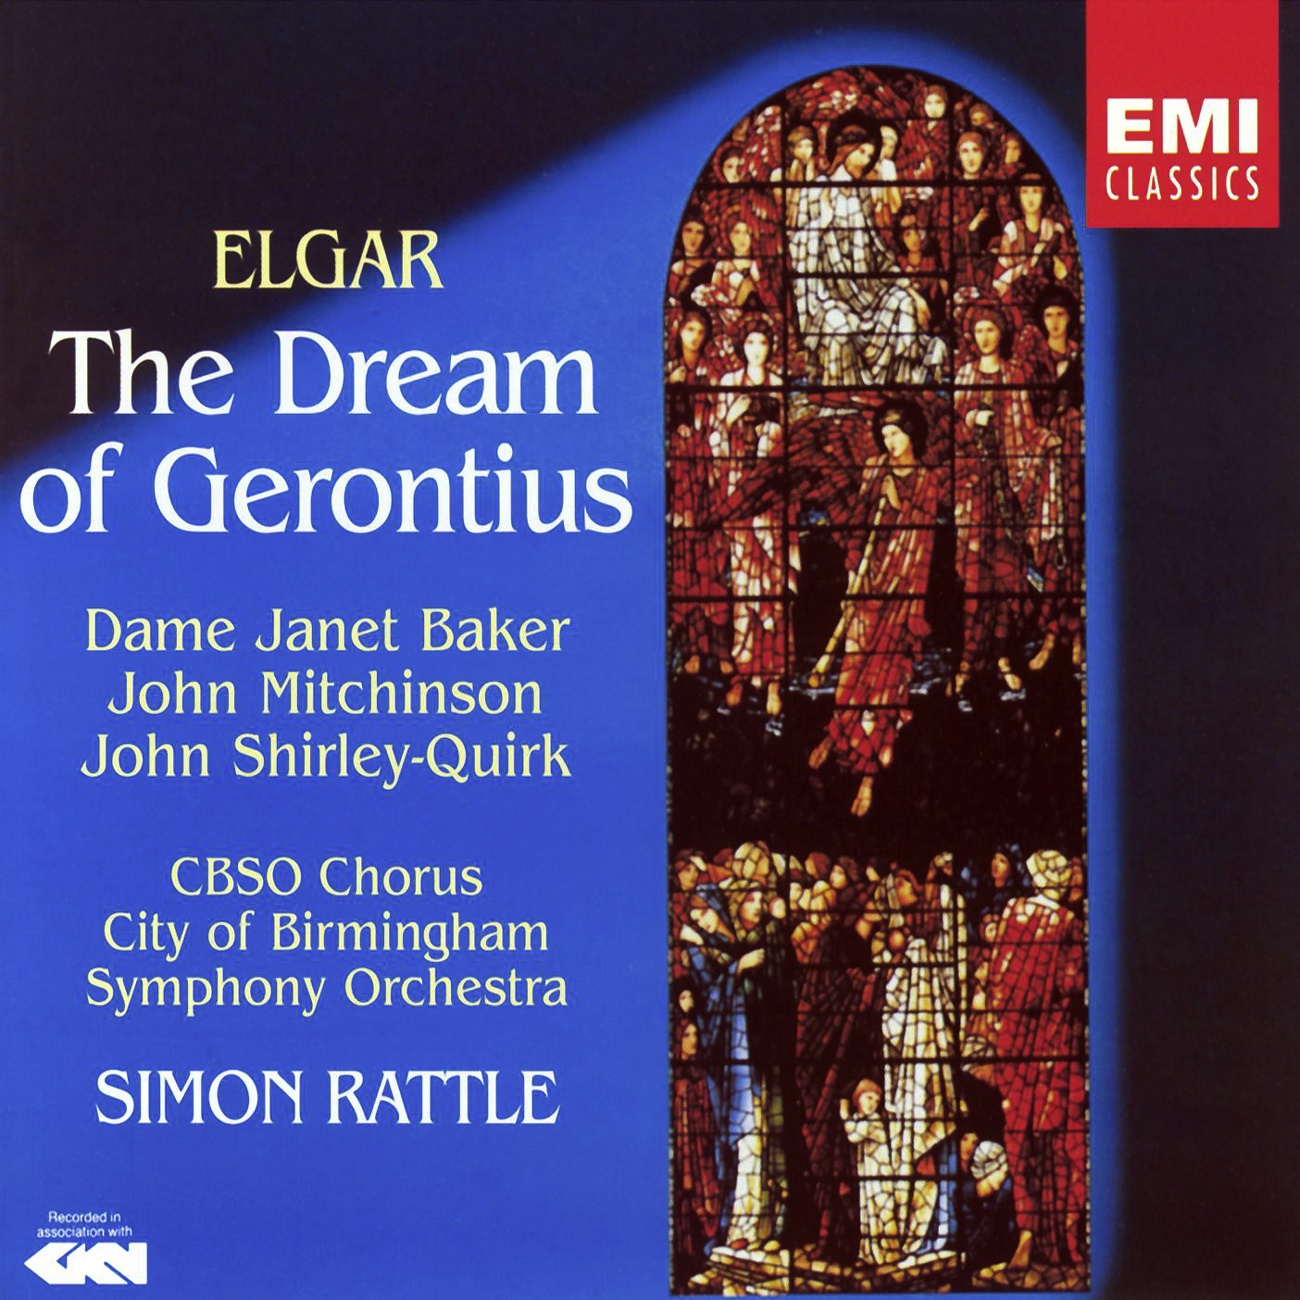 The Dream of Gerontius Op. 38, PART 1: I can no more; for now it comes again (Gerontius)